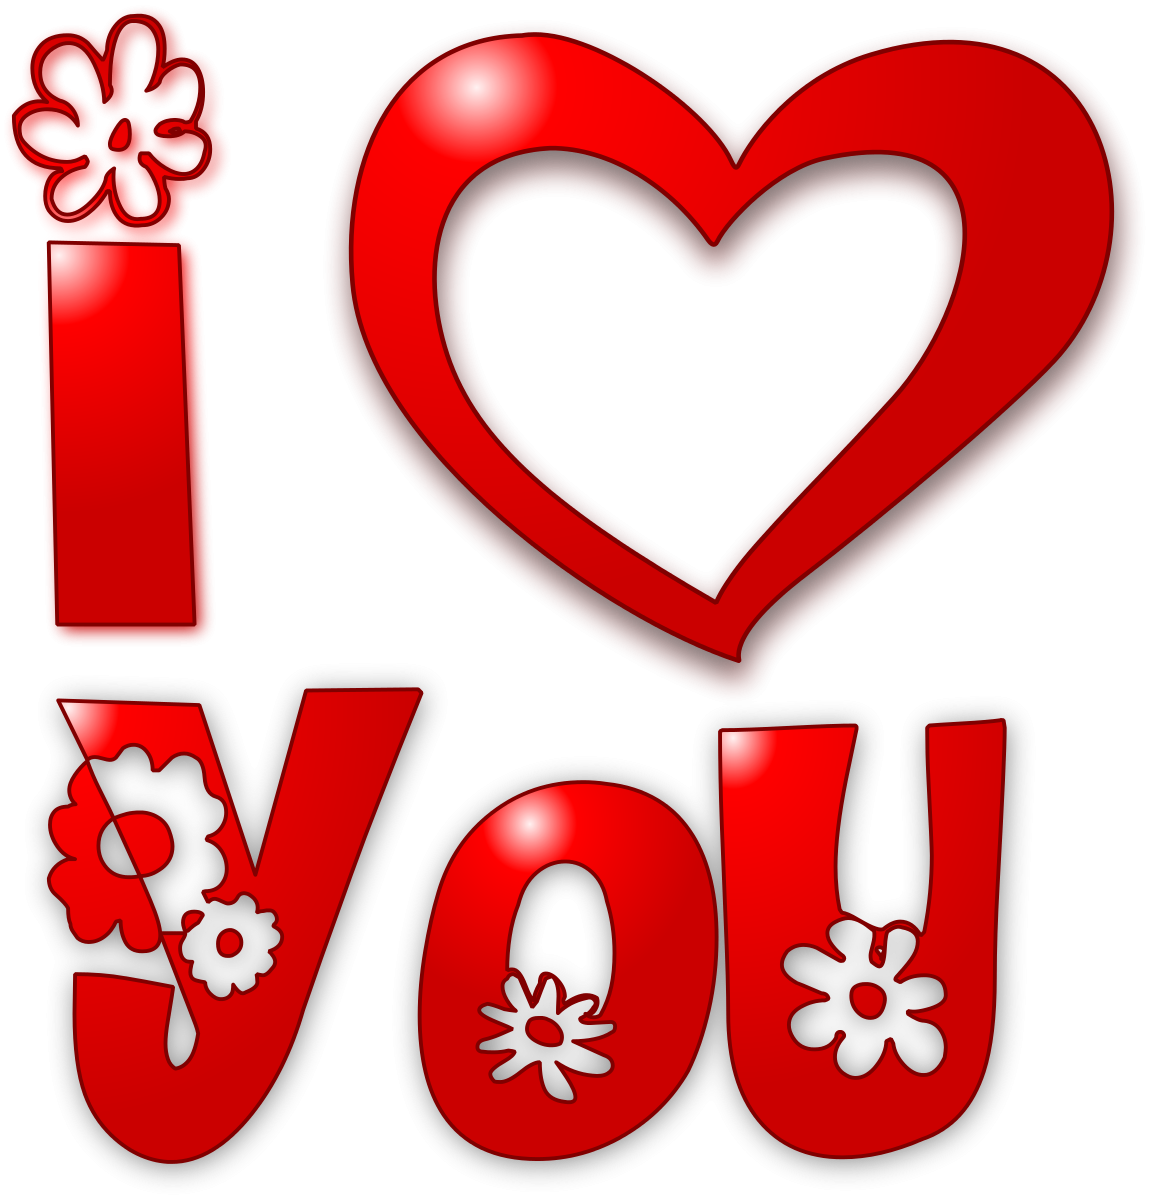 Romantic I Love You Poster Free Image Download